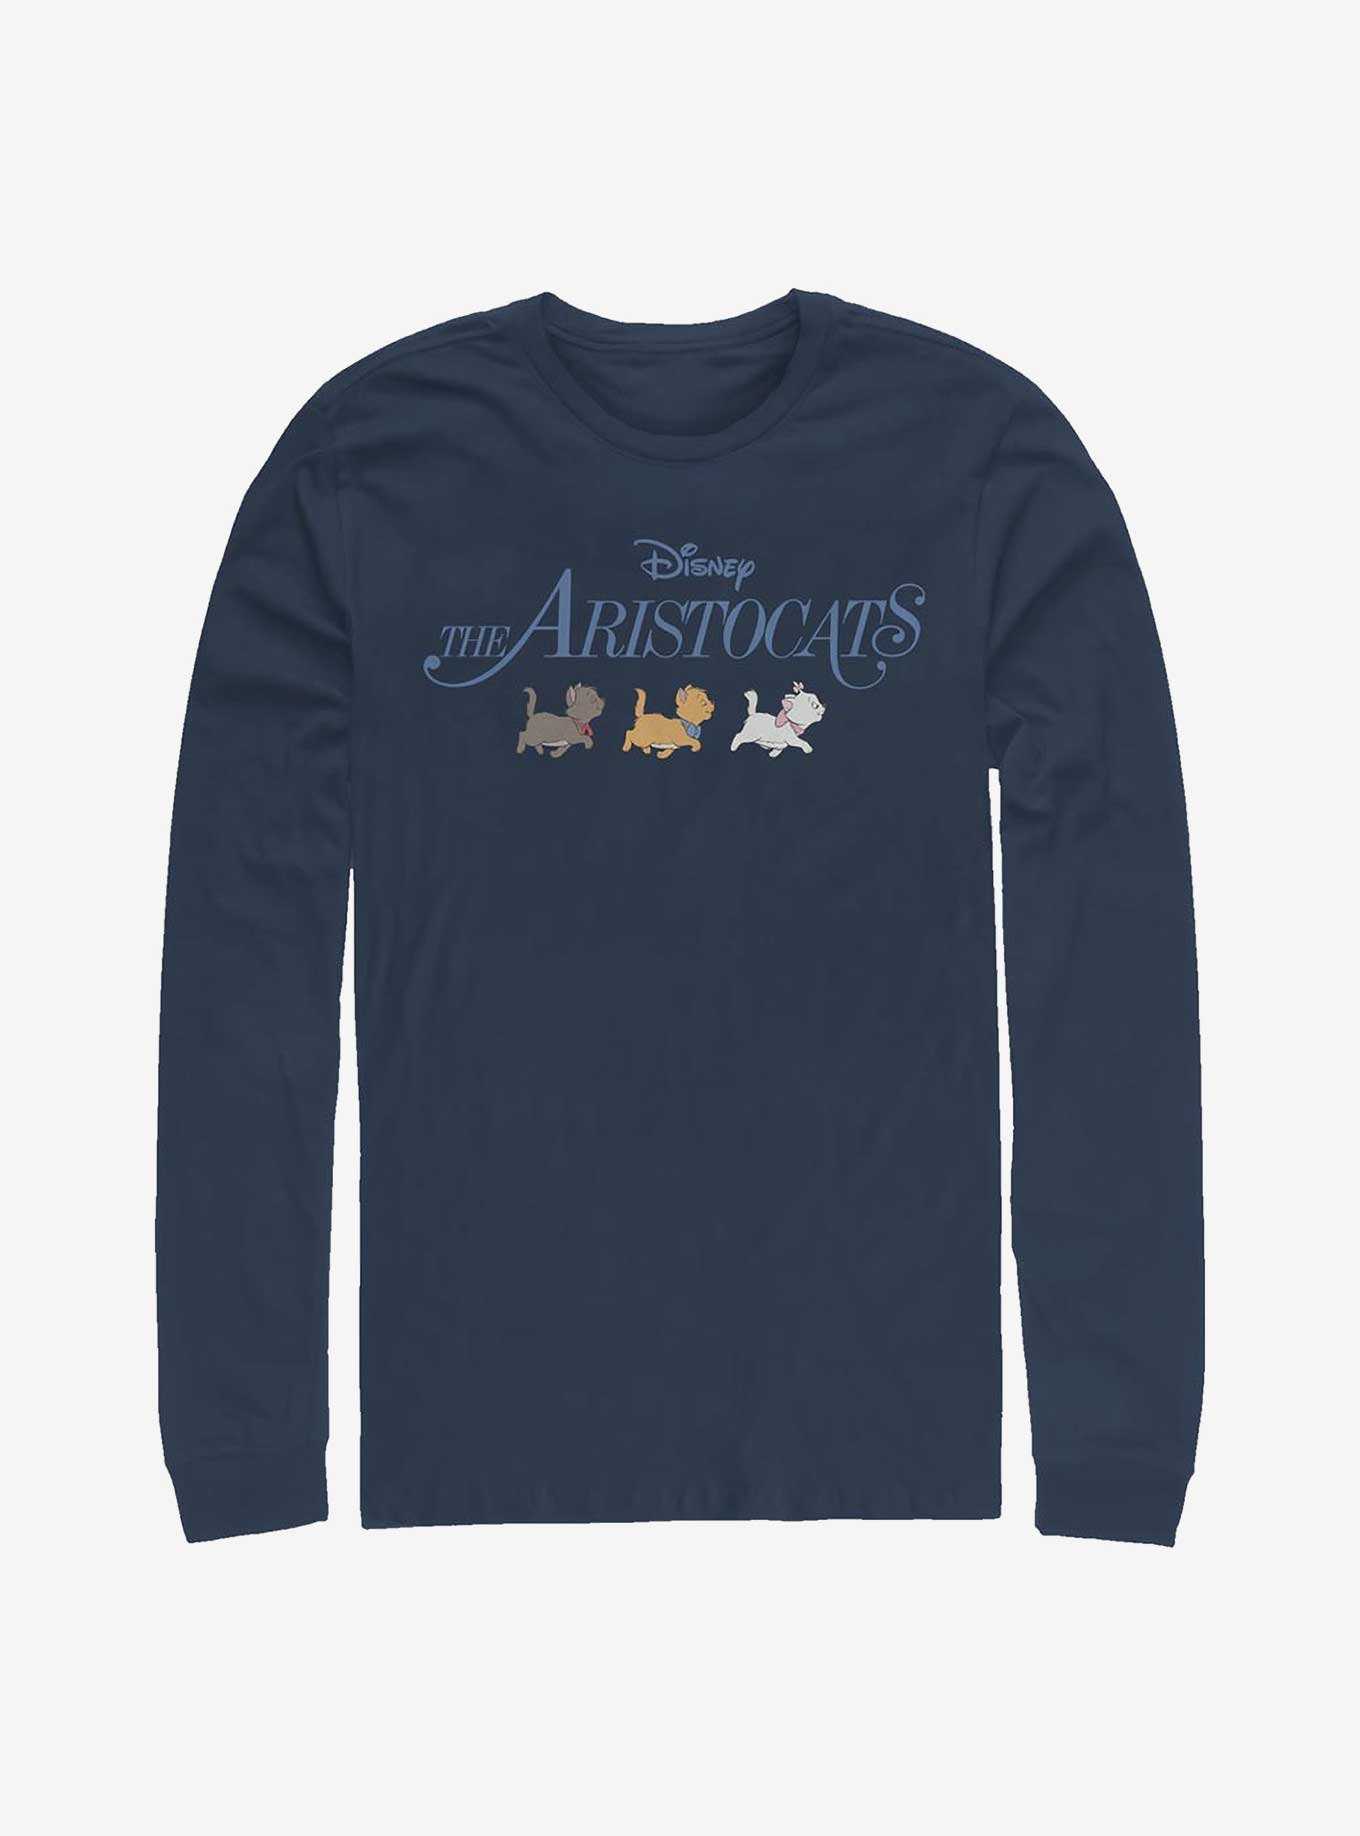 Shirts, Merchandise | OFFICIAL Boxlunch & Aristocats The Gifts